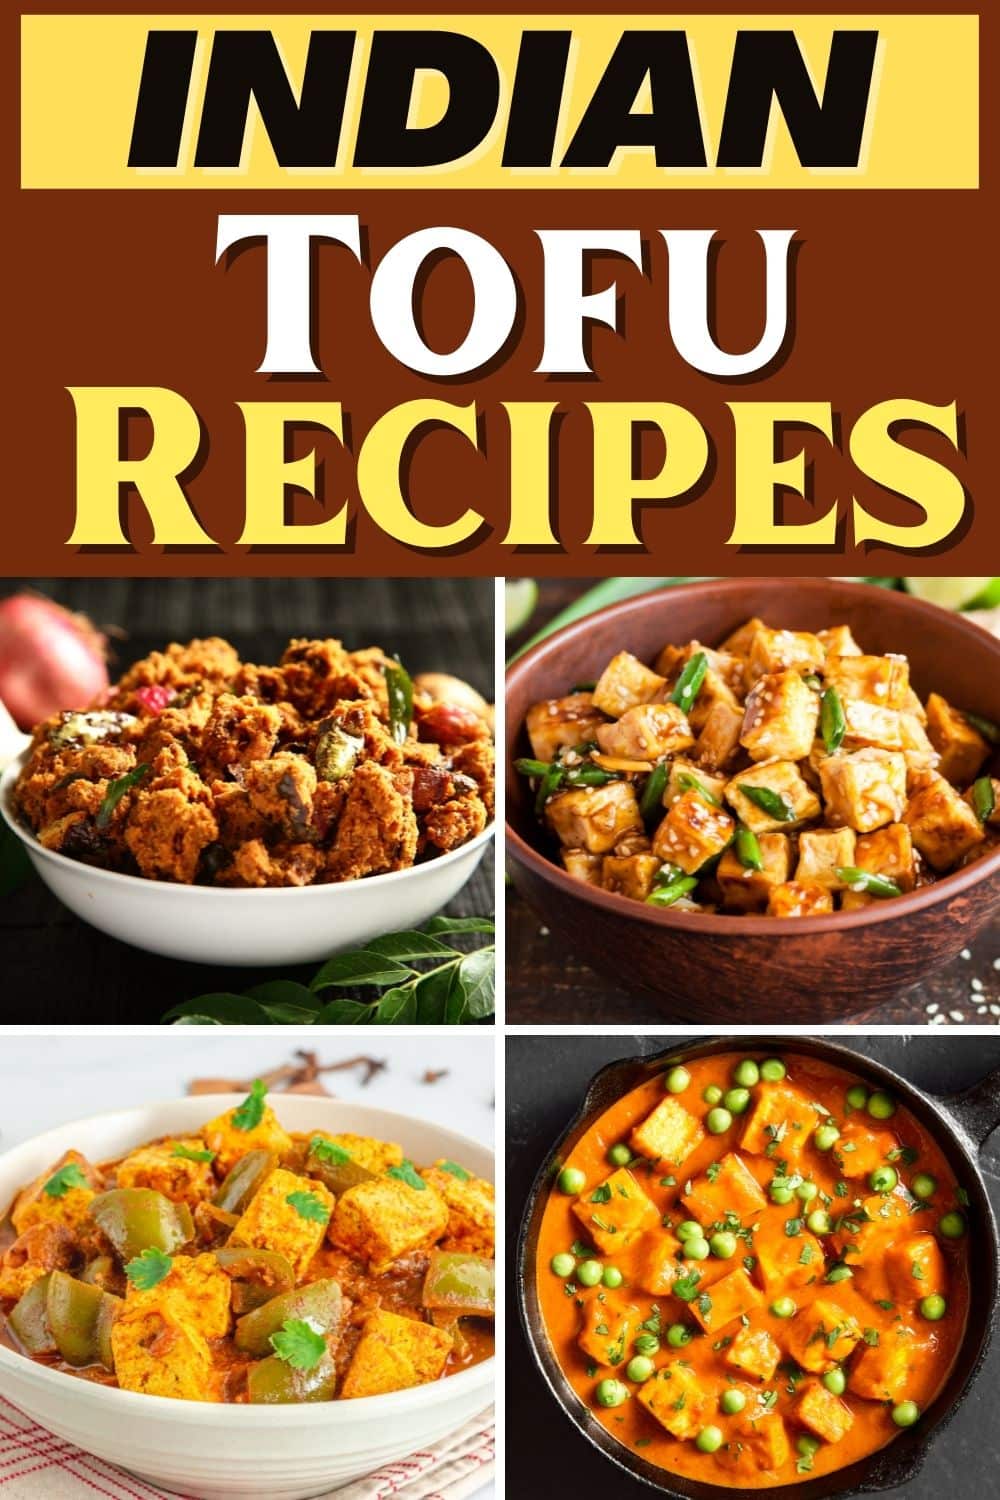 10 Best Indian Tofu Recipes (+ Easy Vegetarian Meals) - Insanely Good